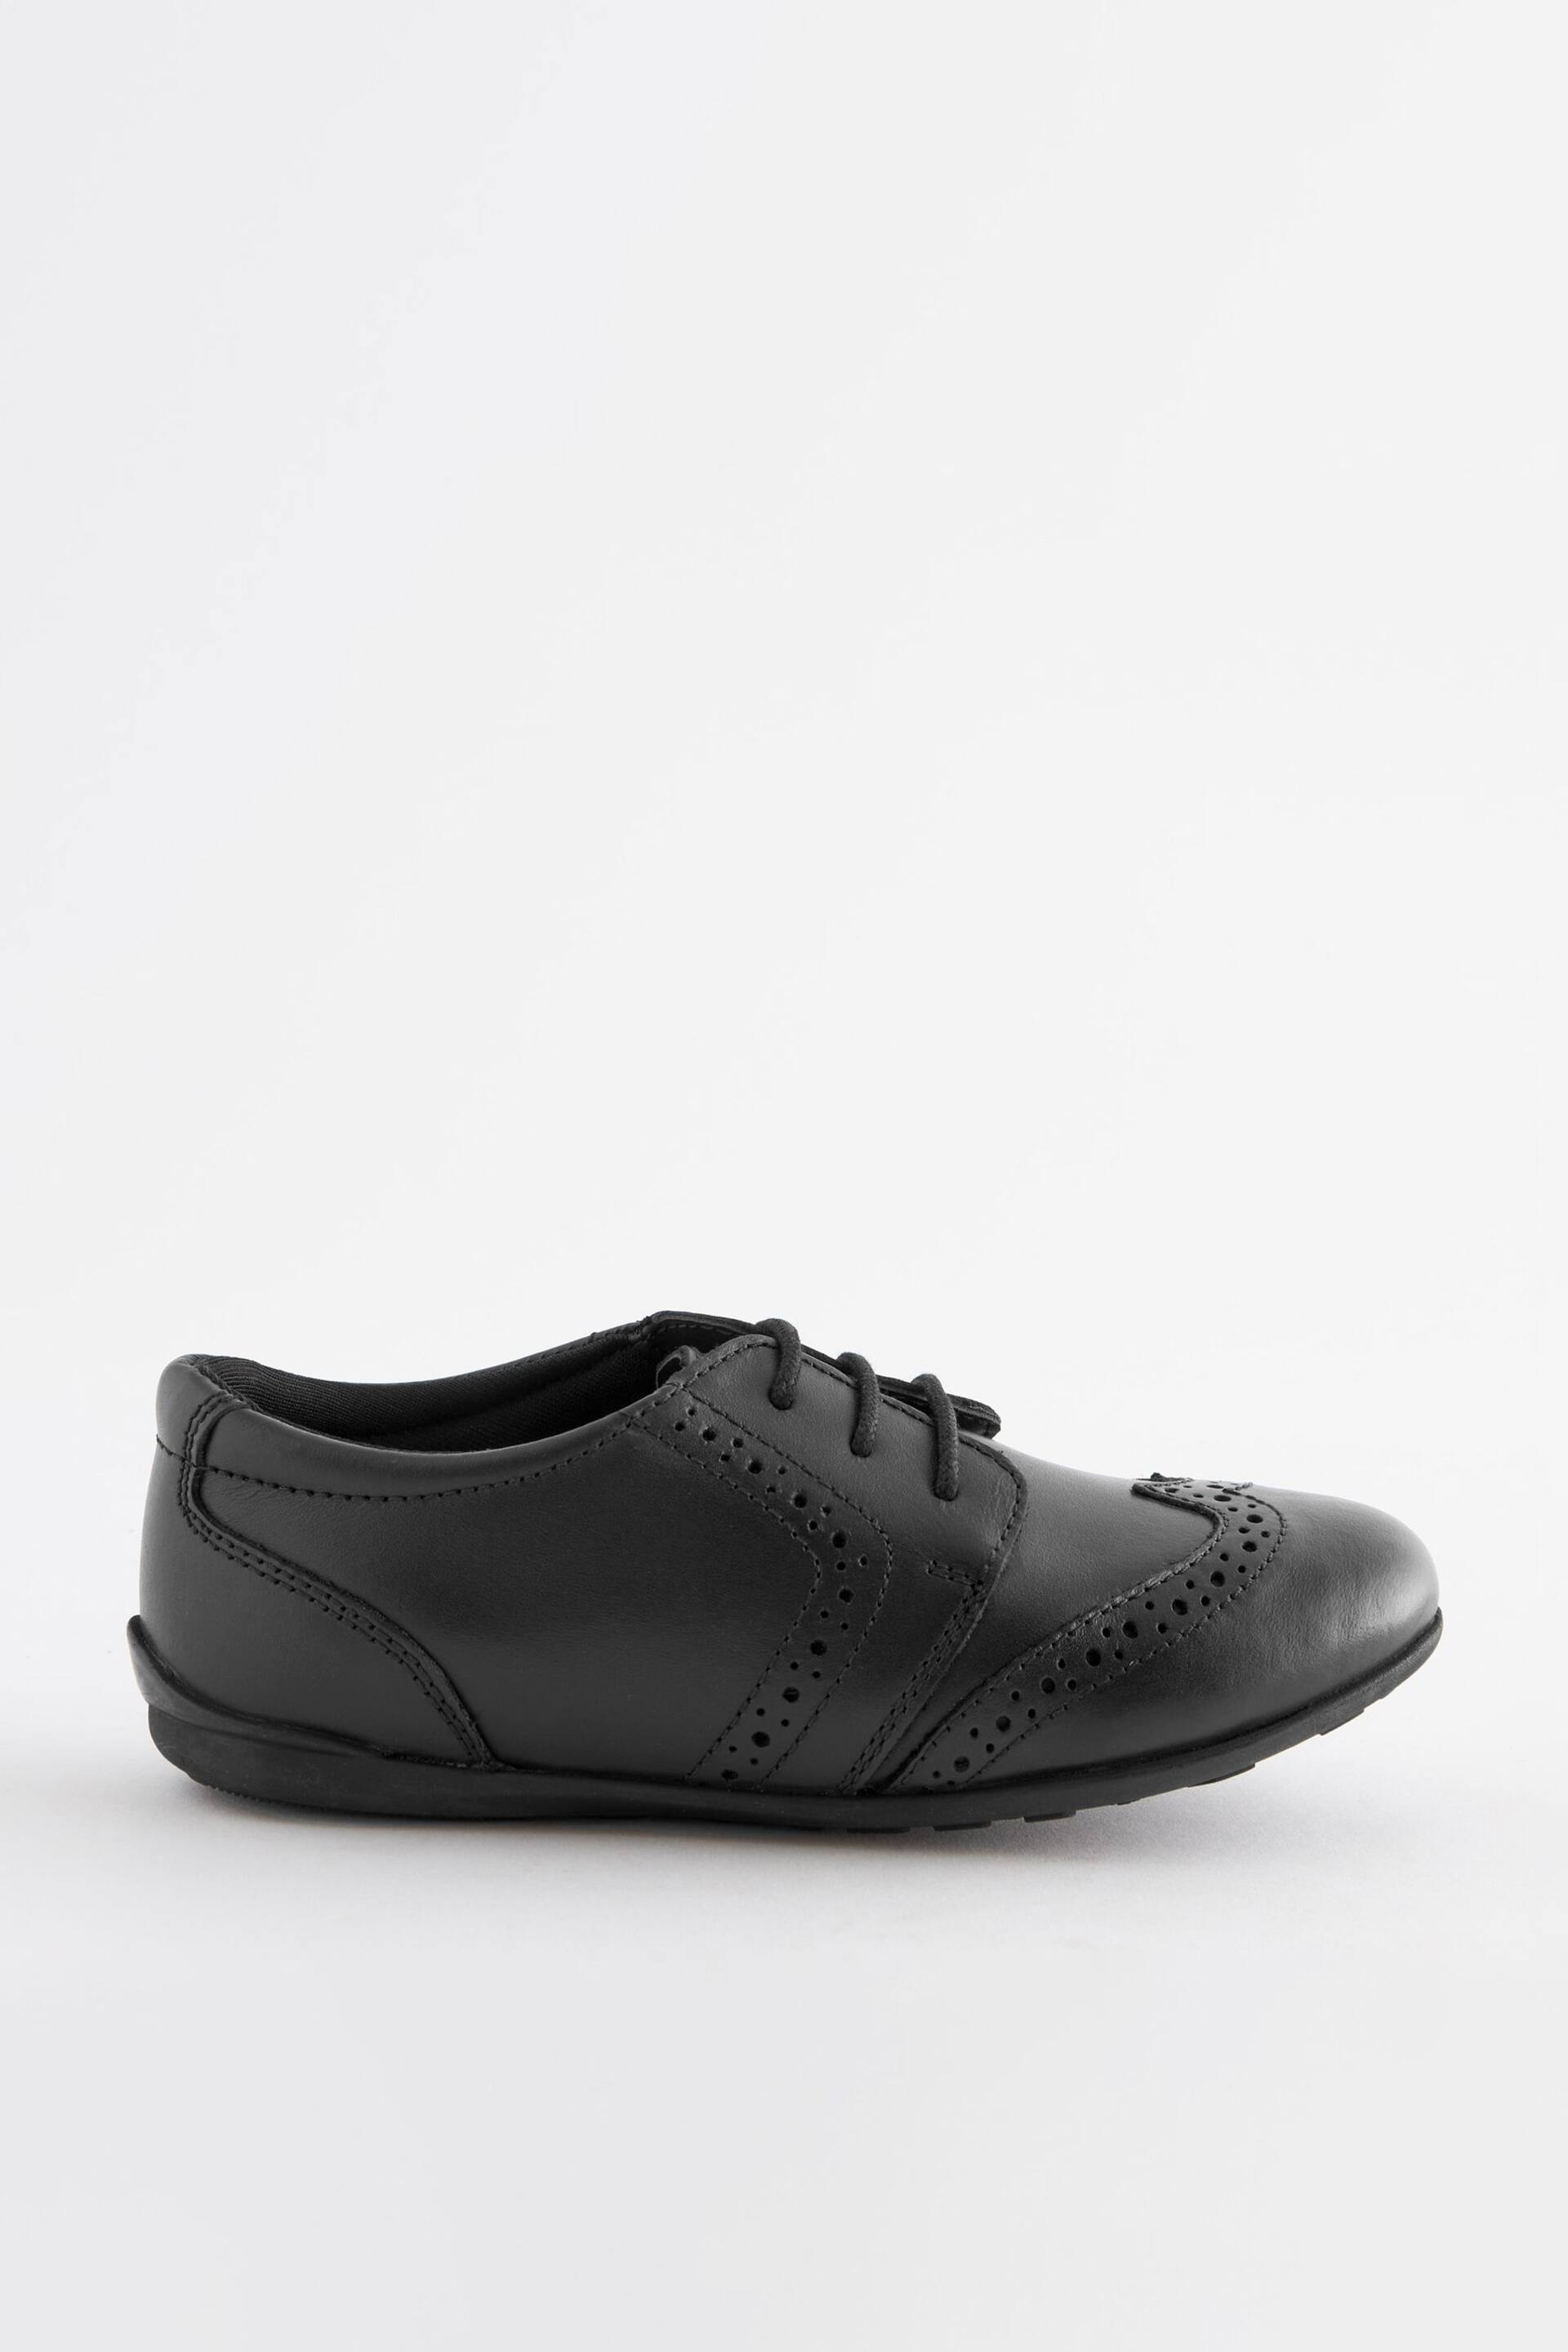 Black Standard Fit (F) School Leather Lace-Up Brogues - Image 2 of 7